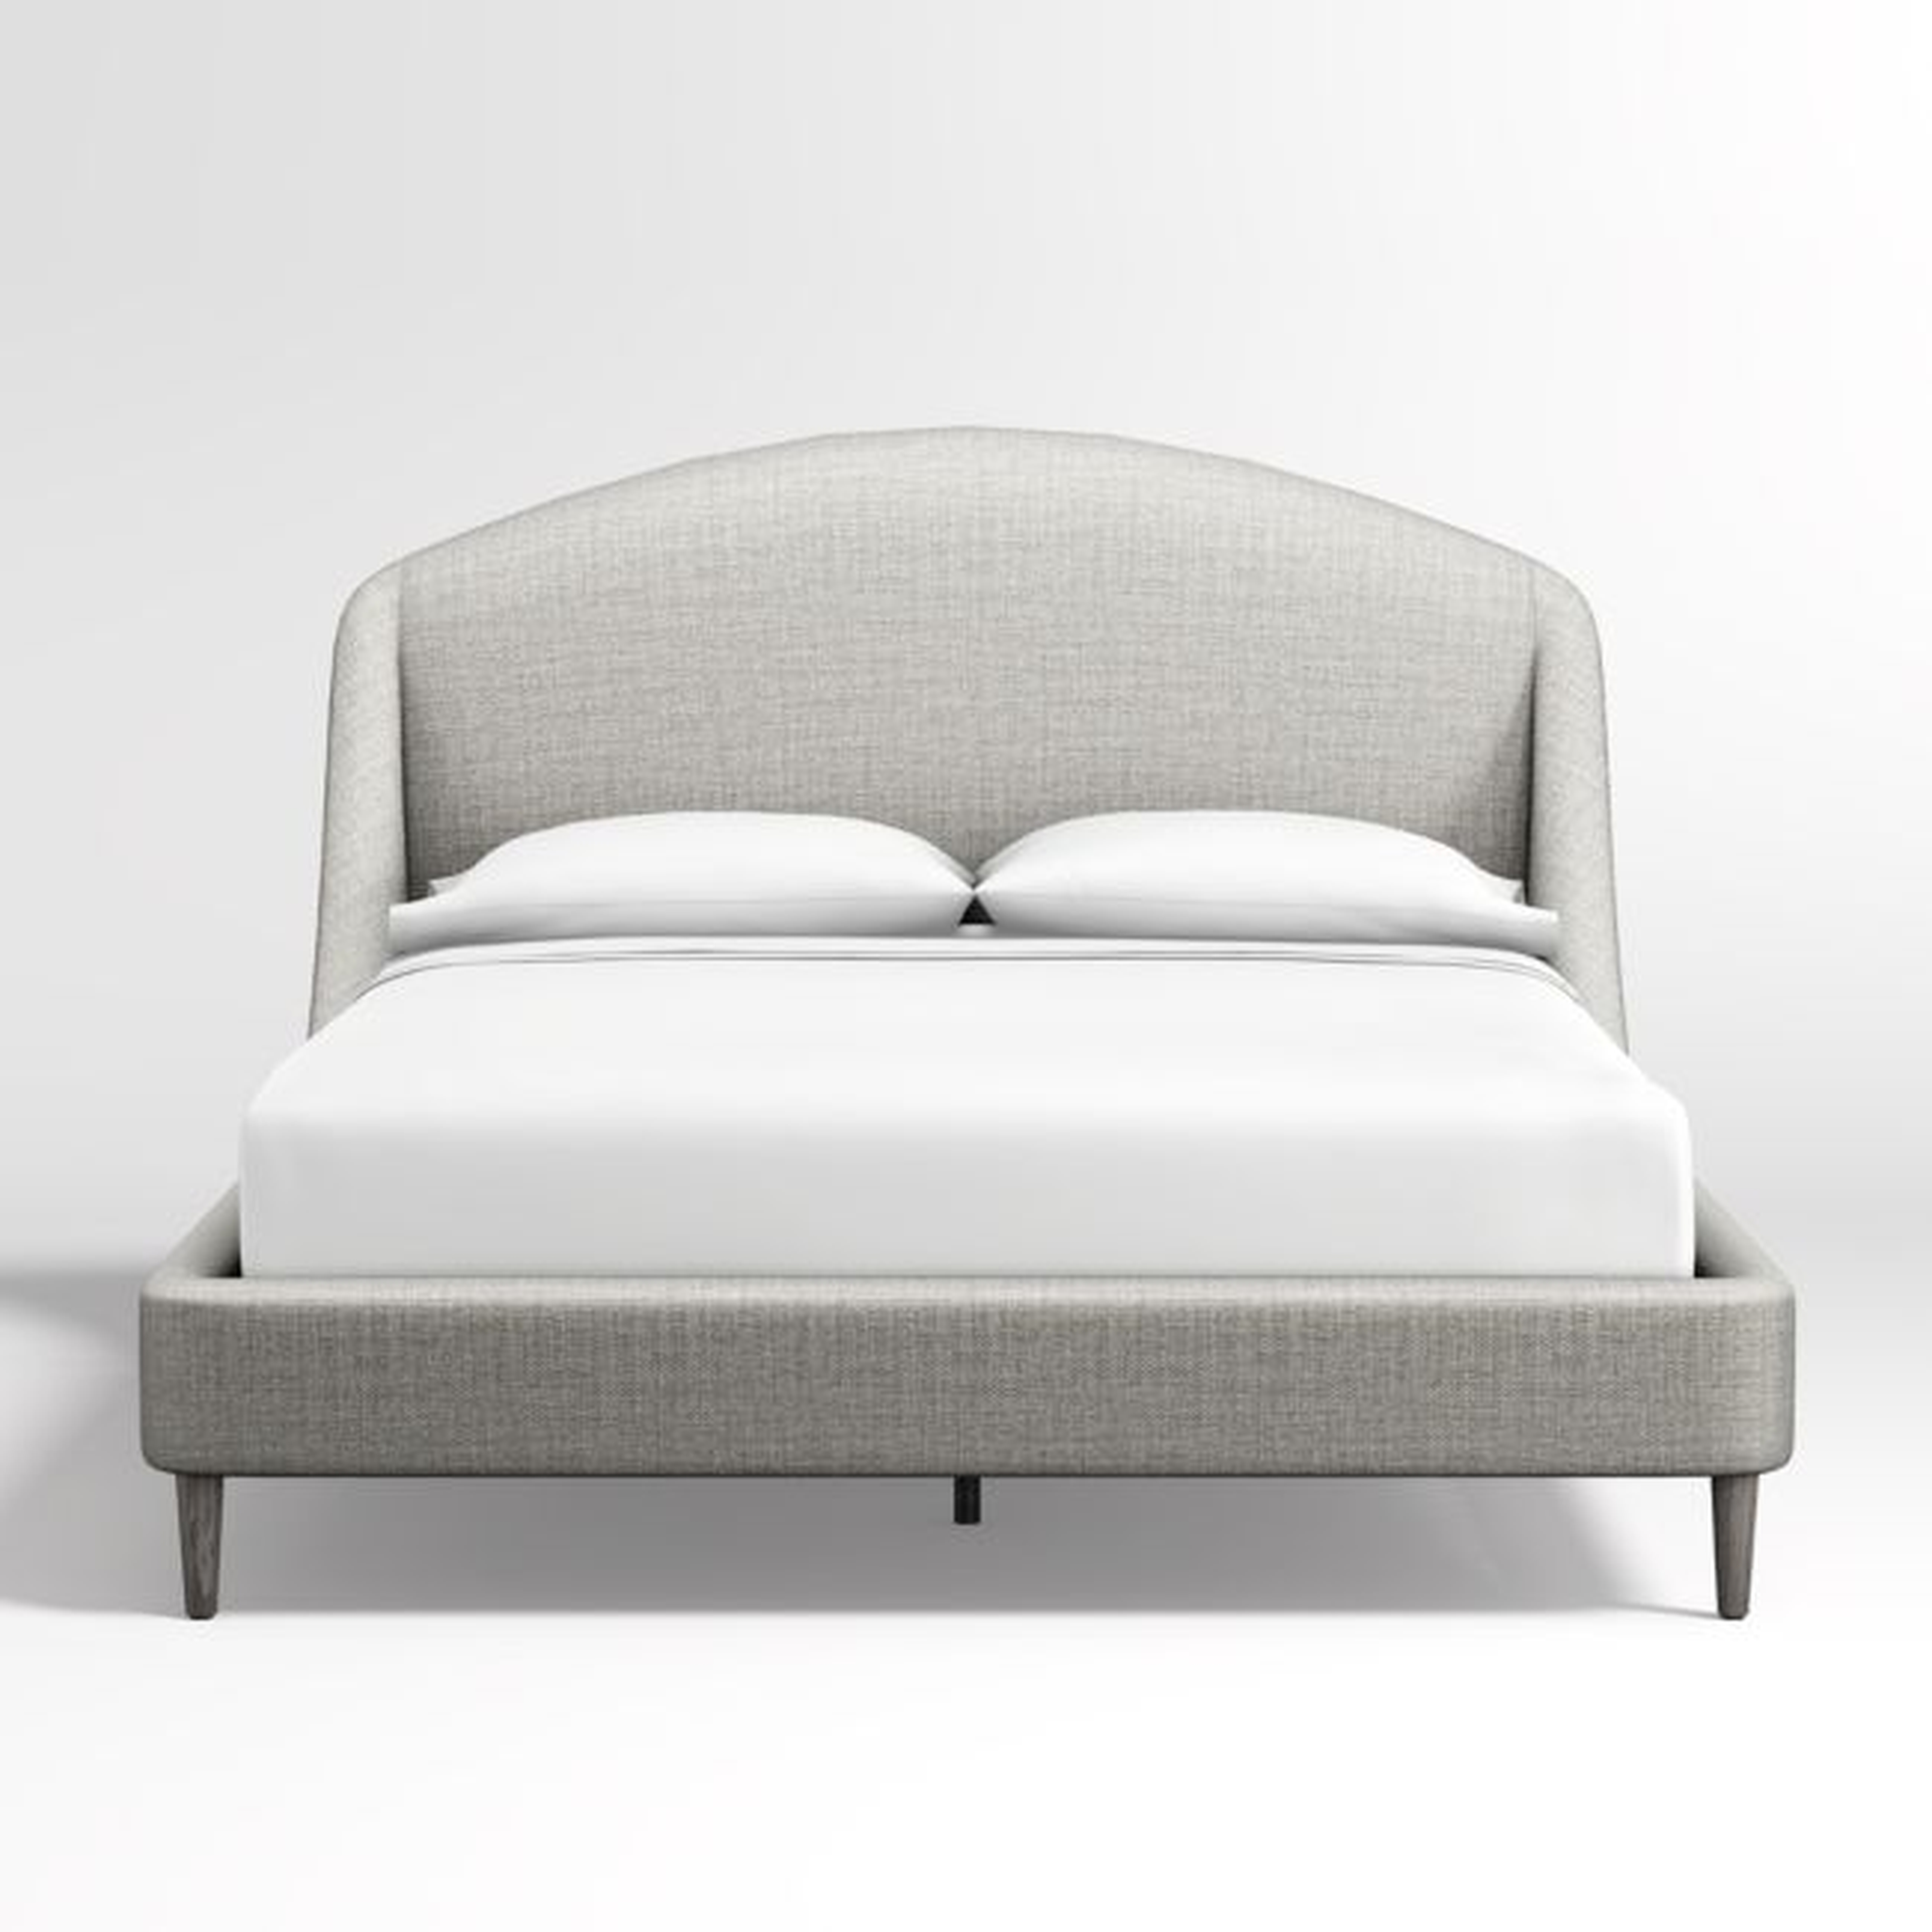 Lafayette Mist Grey Upholstered Queen Bed without Footboard - Crate and Barrel